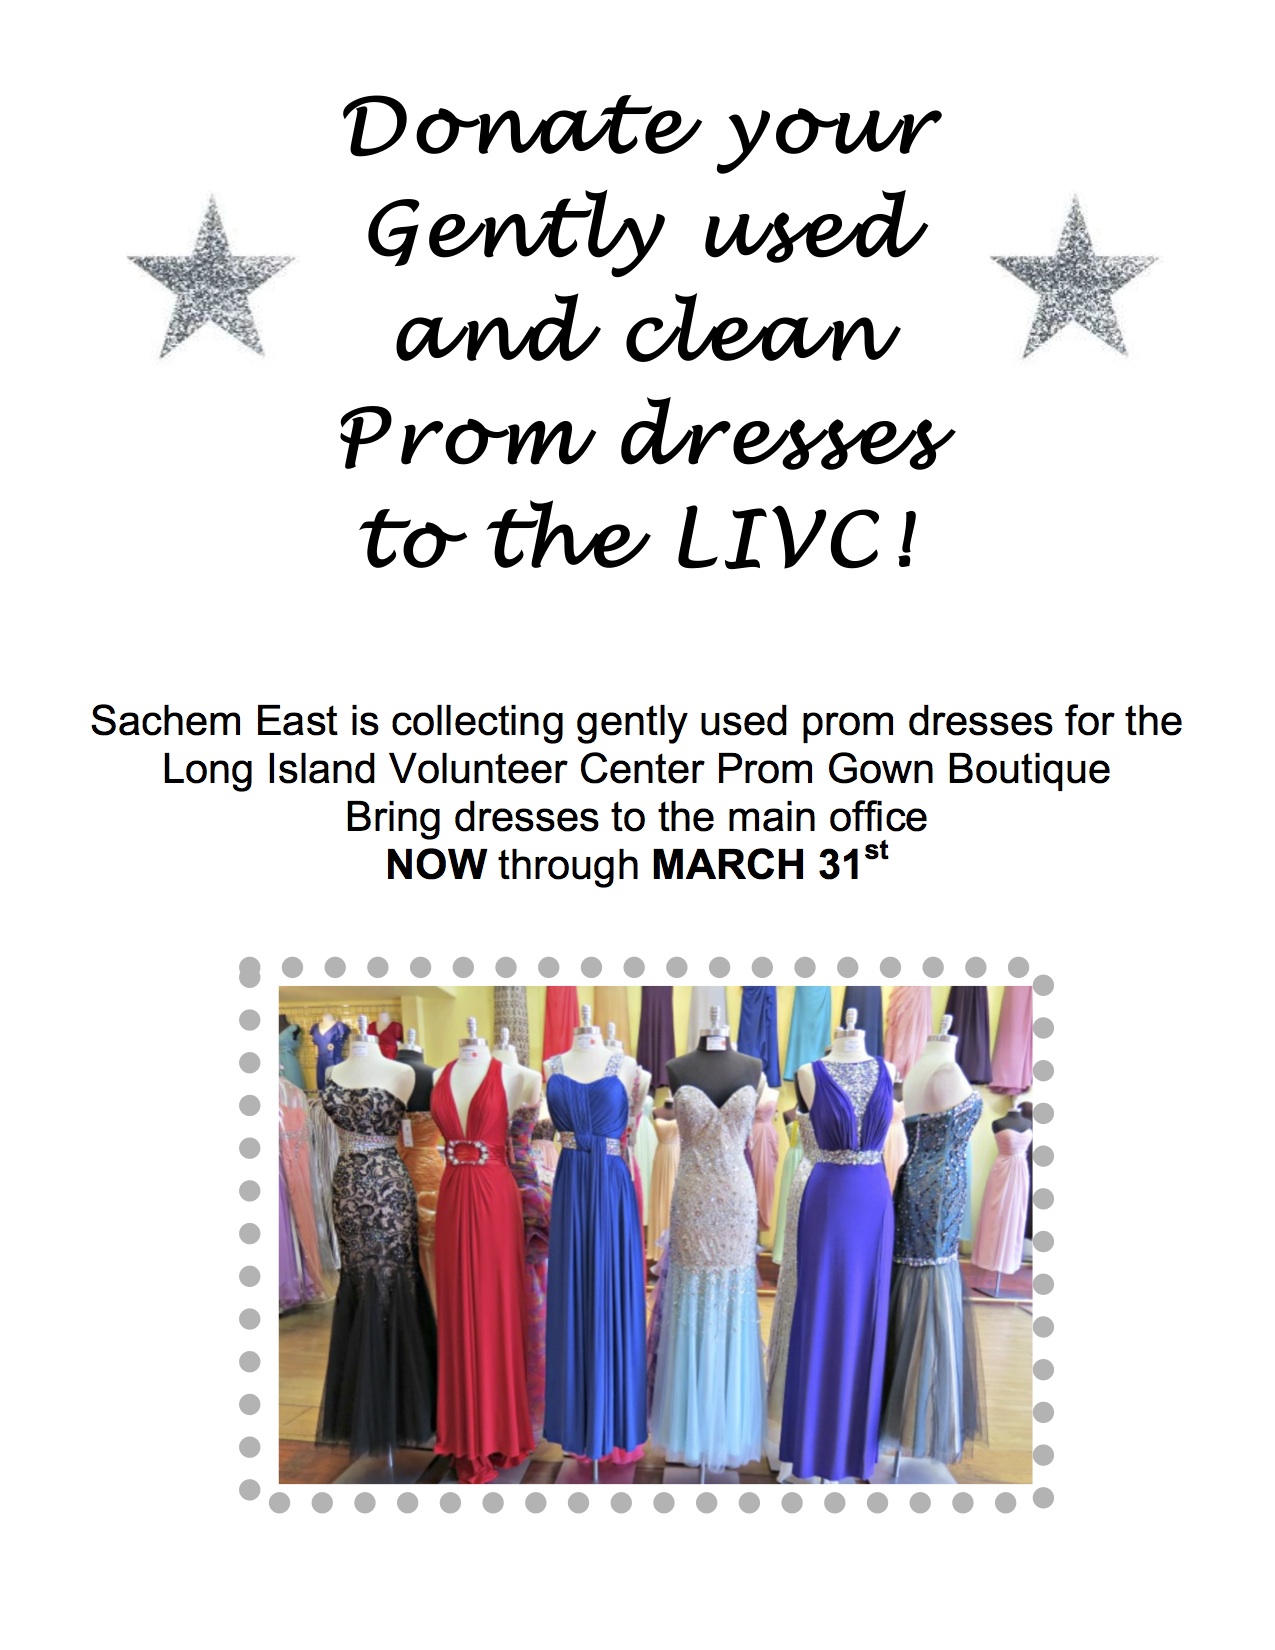 Reminder: Donations of gently used business clothing are welcome for Dress  to Impress